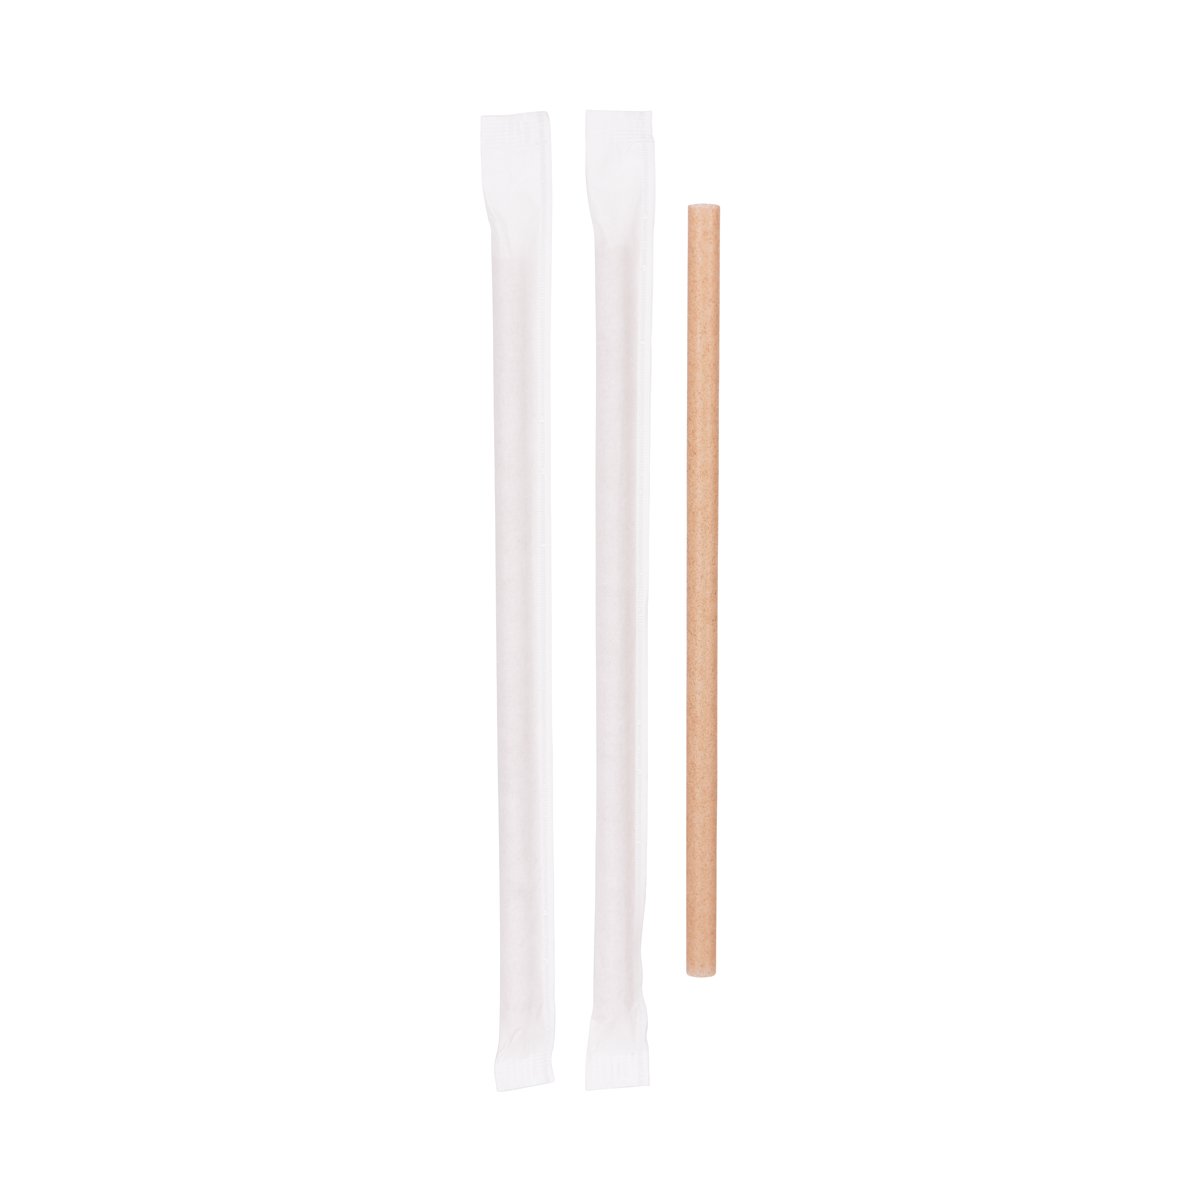 STHSC8WRPS Sugarcane with PLA Regular Straw Wrapped 8x200mm Tomkin Australia Hospitality Supplies